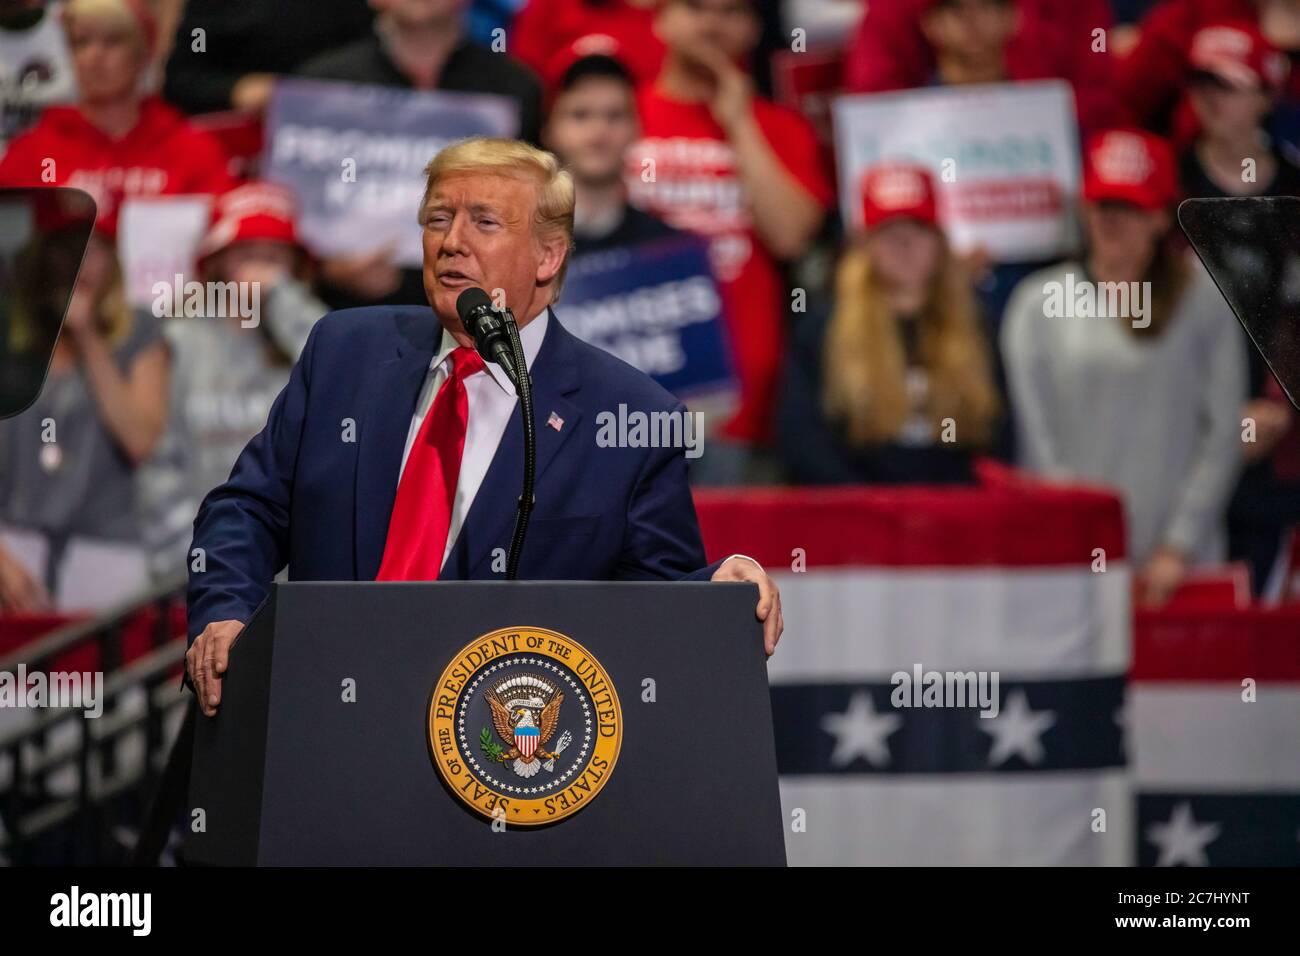 President Trump speaking to his supporters at the rally in the Bojangle's Coliseum Stock Photo